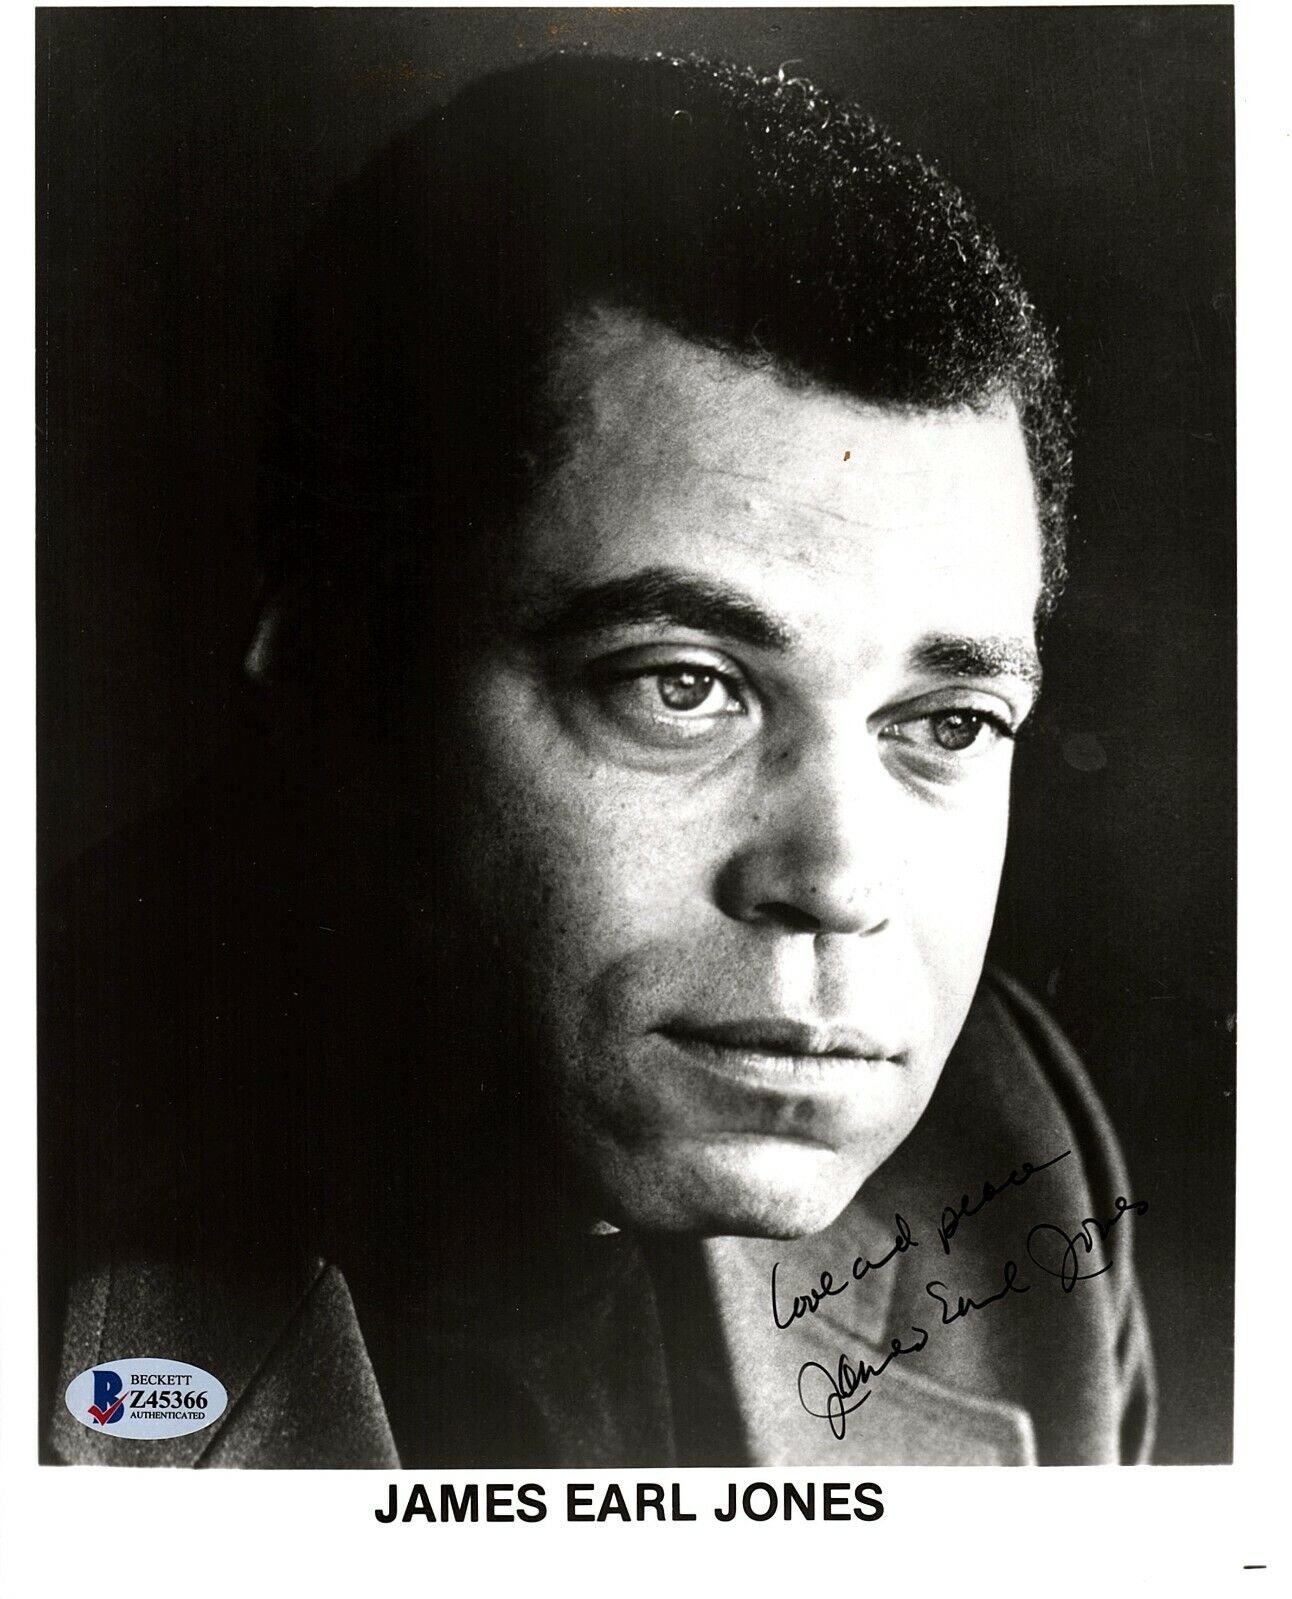 JAMES EARL JONES Signed Autographed 8x10 Photo Poster painting Beckett BAS #Z45366